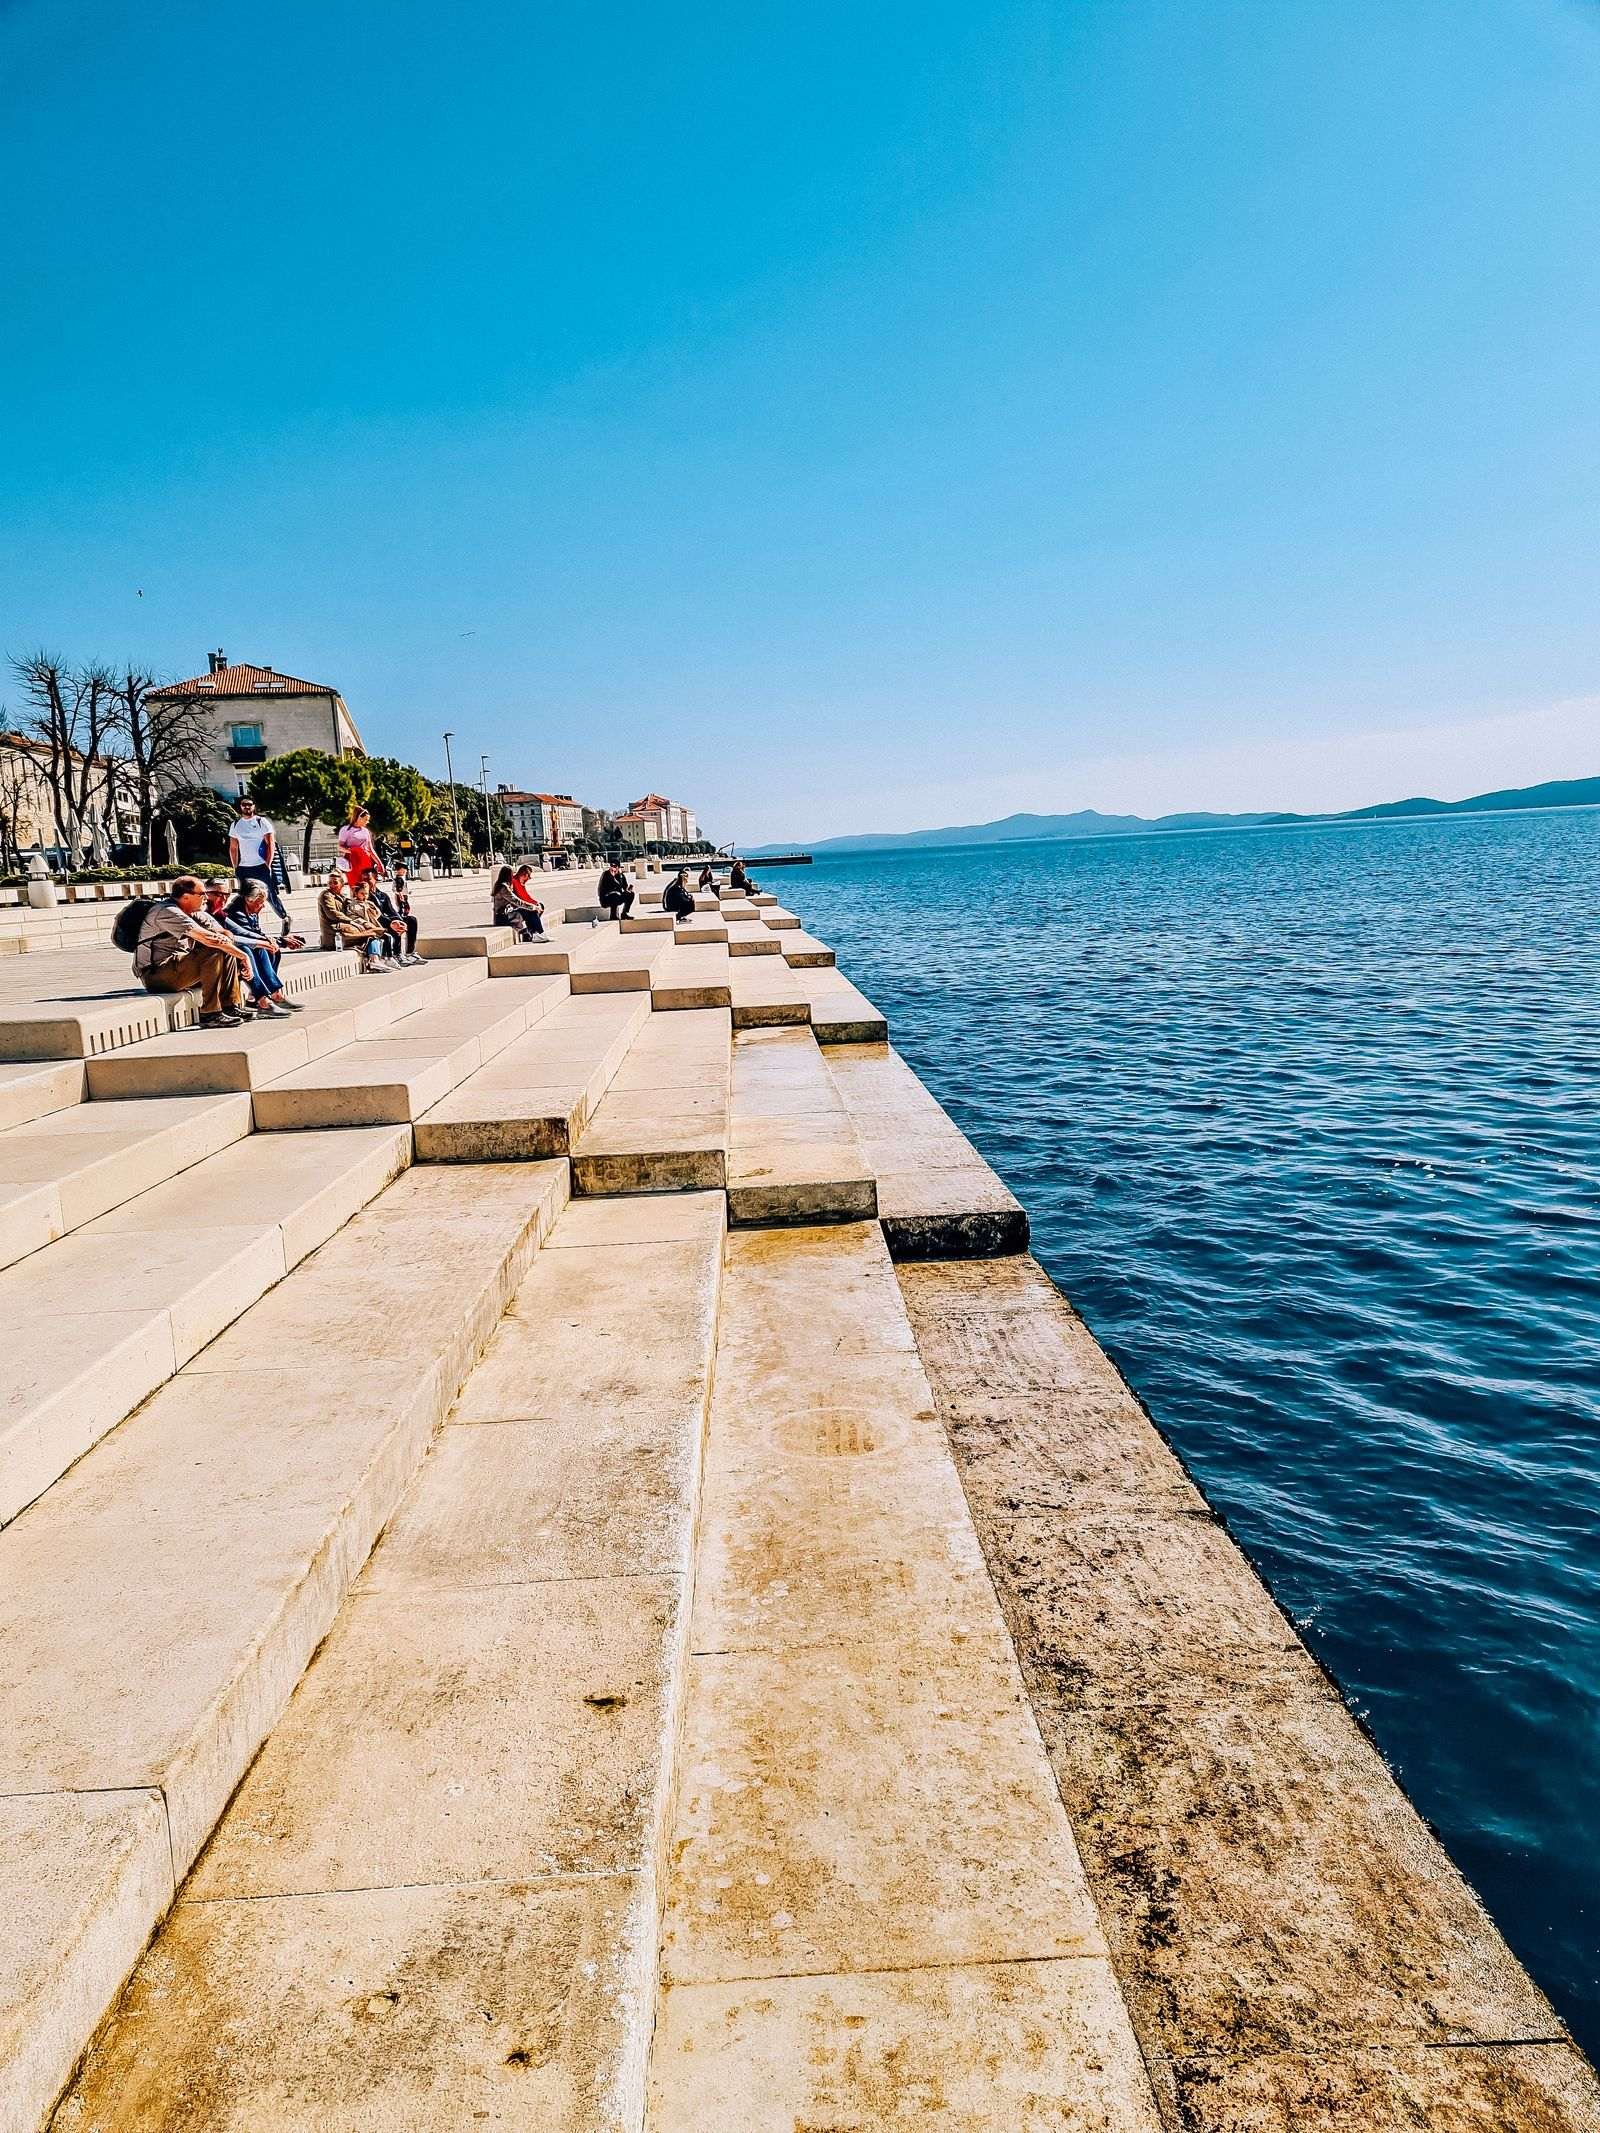 Stone steps leading down to the blue sea with people sitting on the steps in the sun